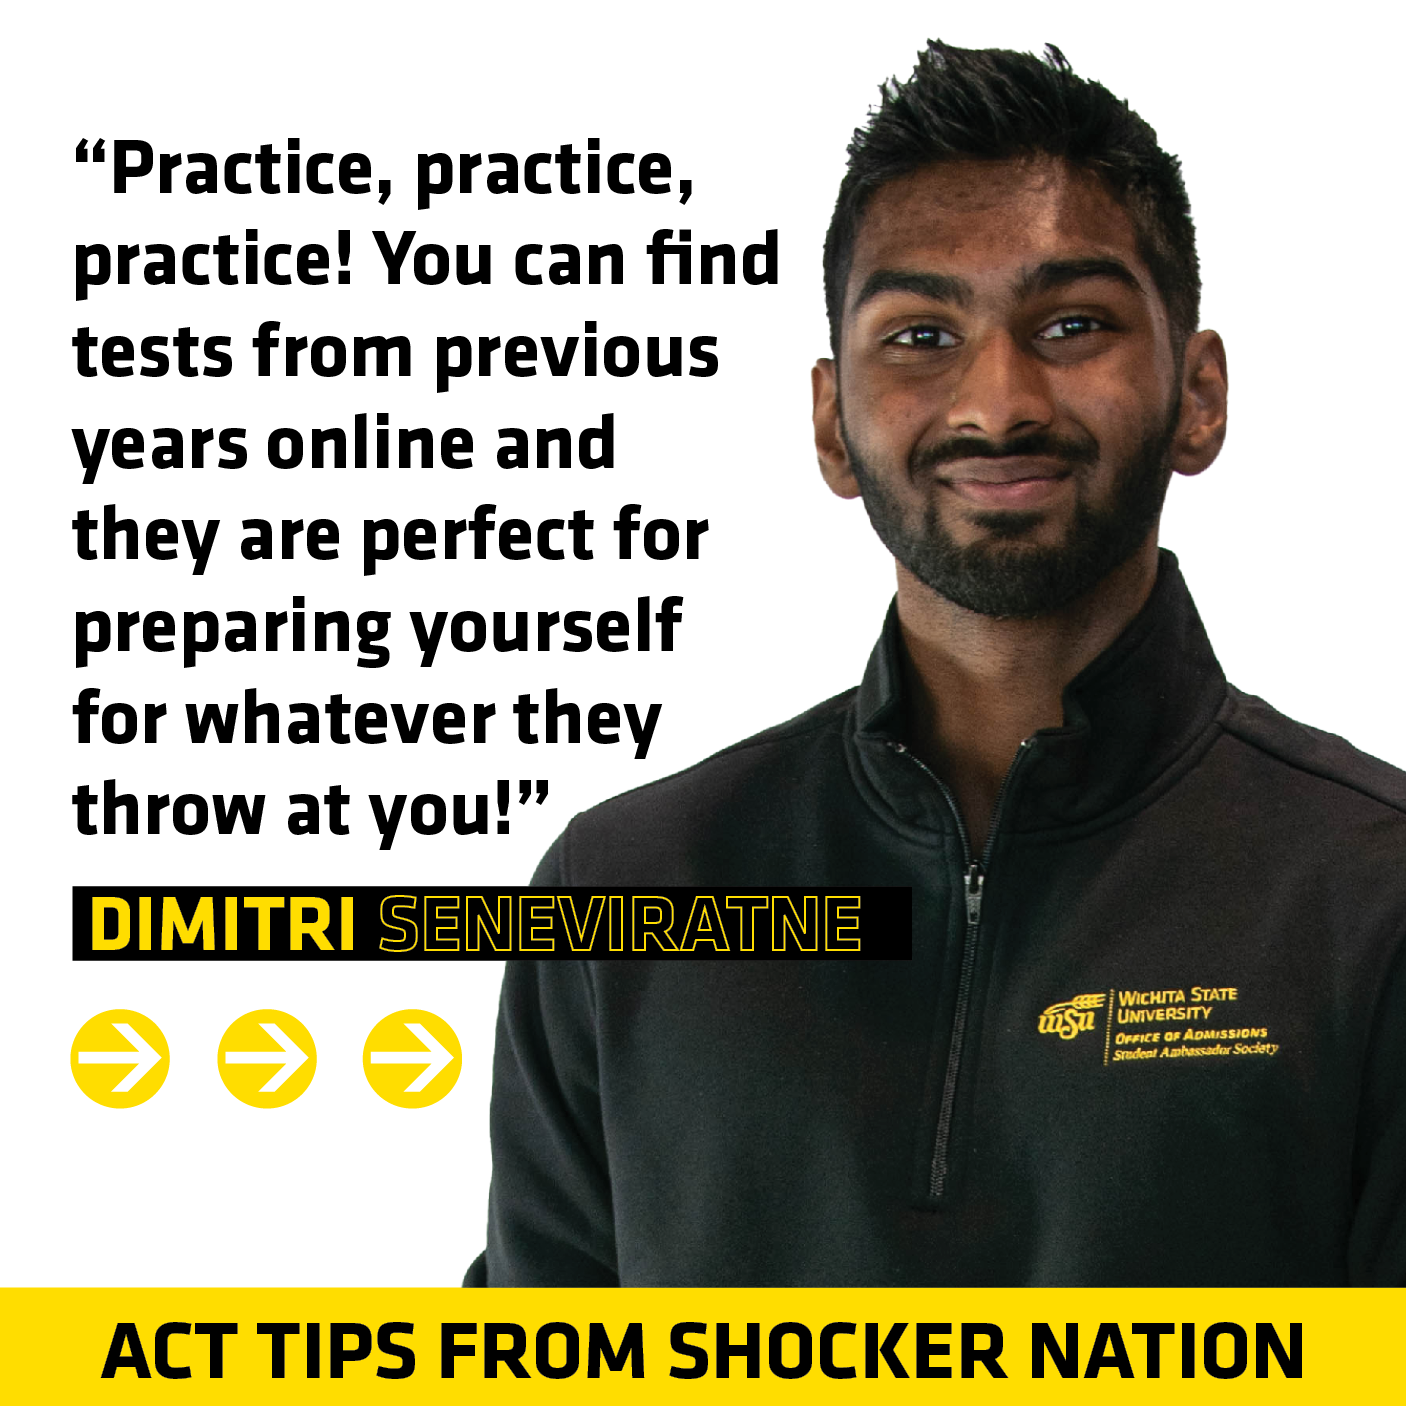 ACT Tips - Dimitri Seneviratne, "Practice, Practice, Practice! You can find tests from previous years online and they are perfect preparing yourself for whatever they thrown at you!"